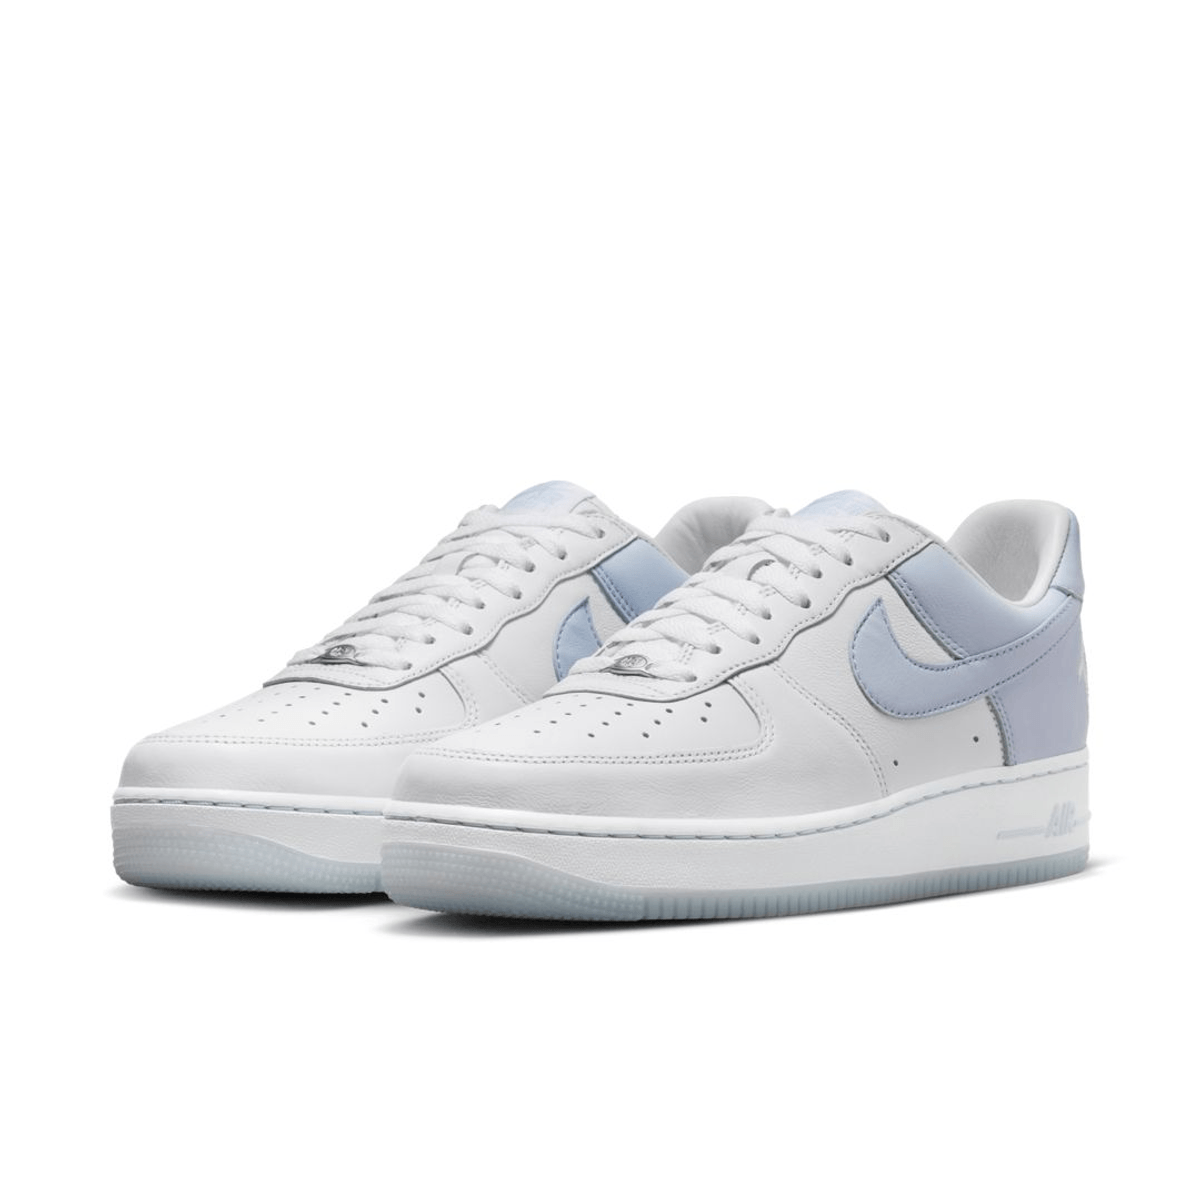 Terror Squad x Nike Air Force 1 “White Porpoise” Is Finally Ready For A Public Release